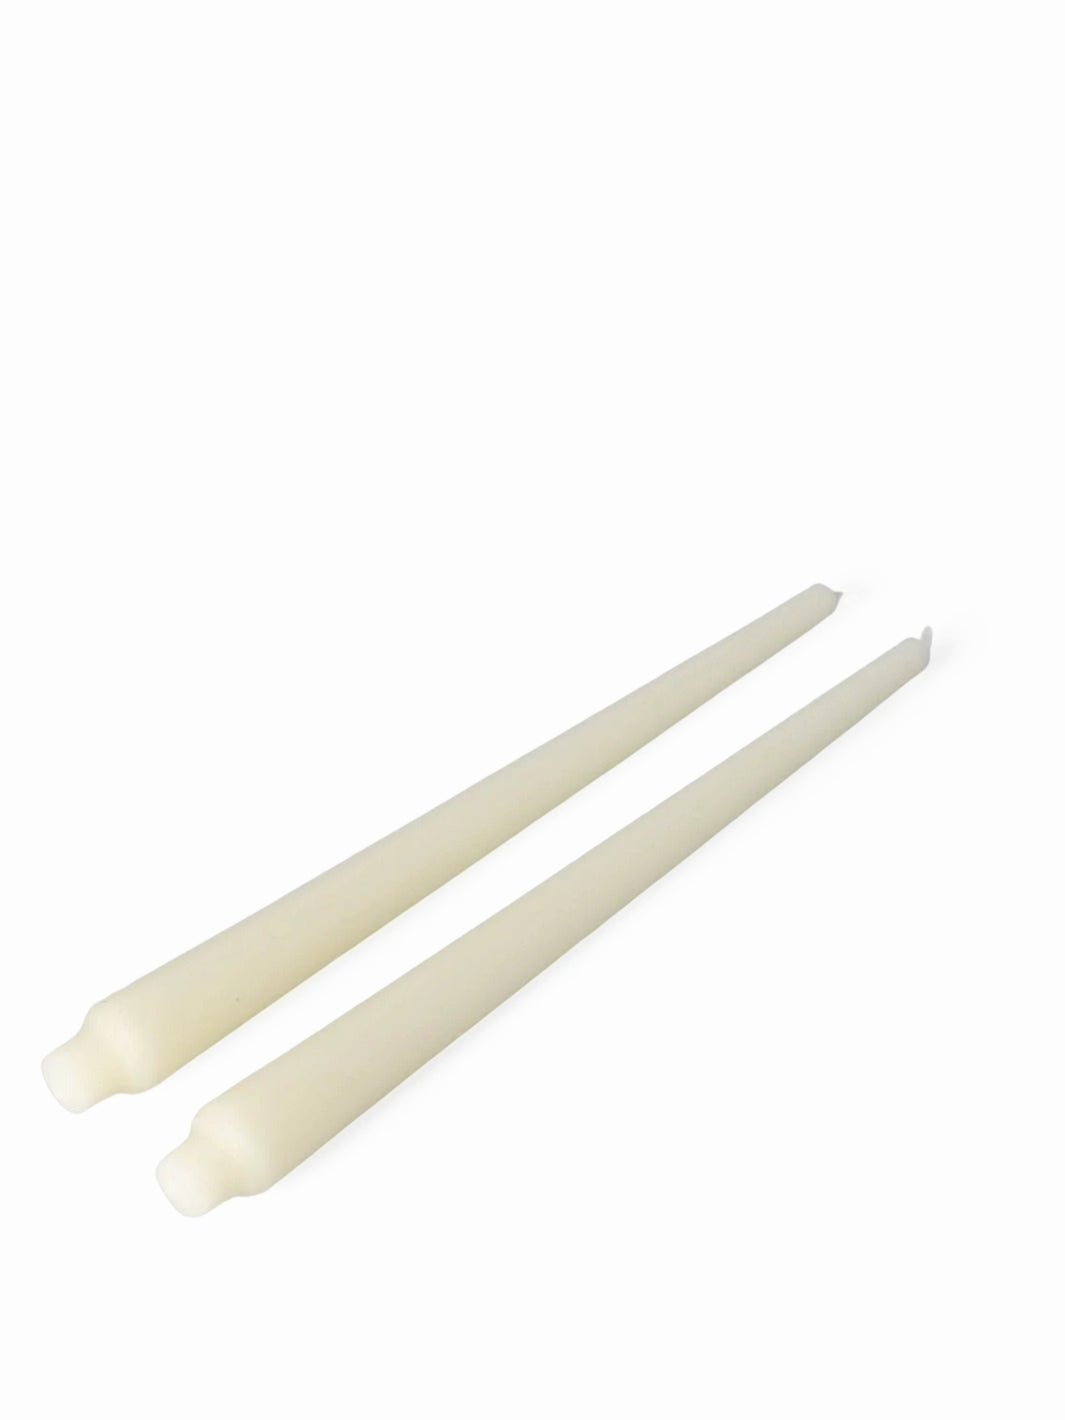 FABLE The Taper Candles (2-Pack) (Tall) (Cream) (Damaged Box)